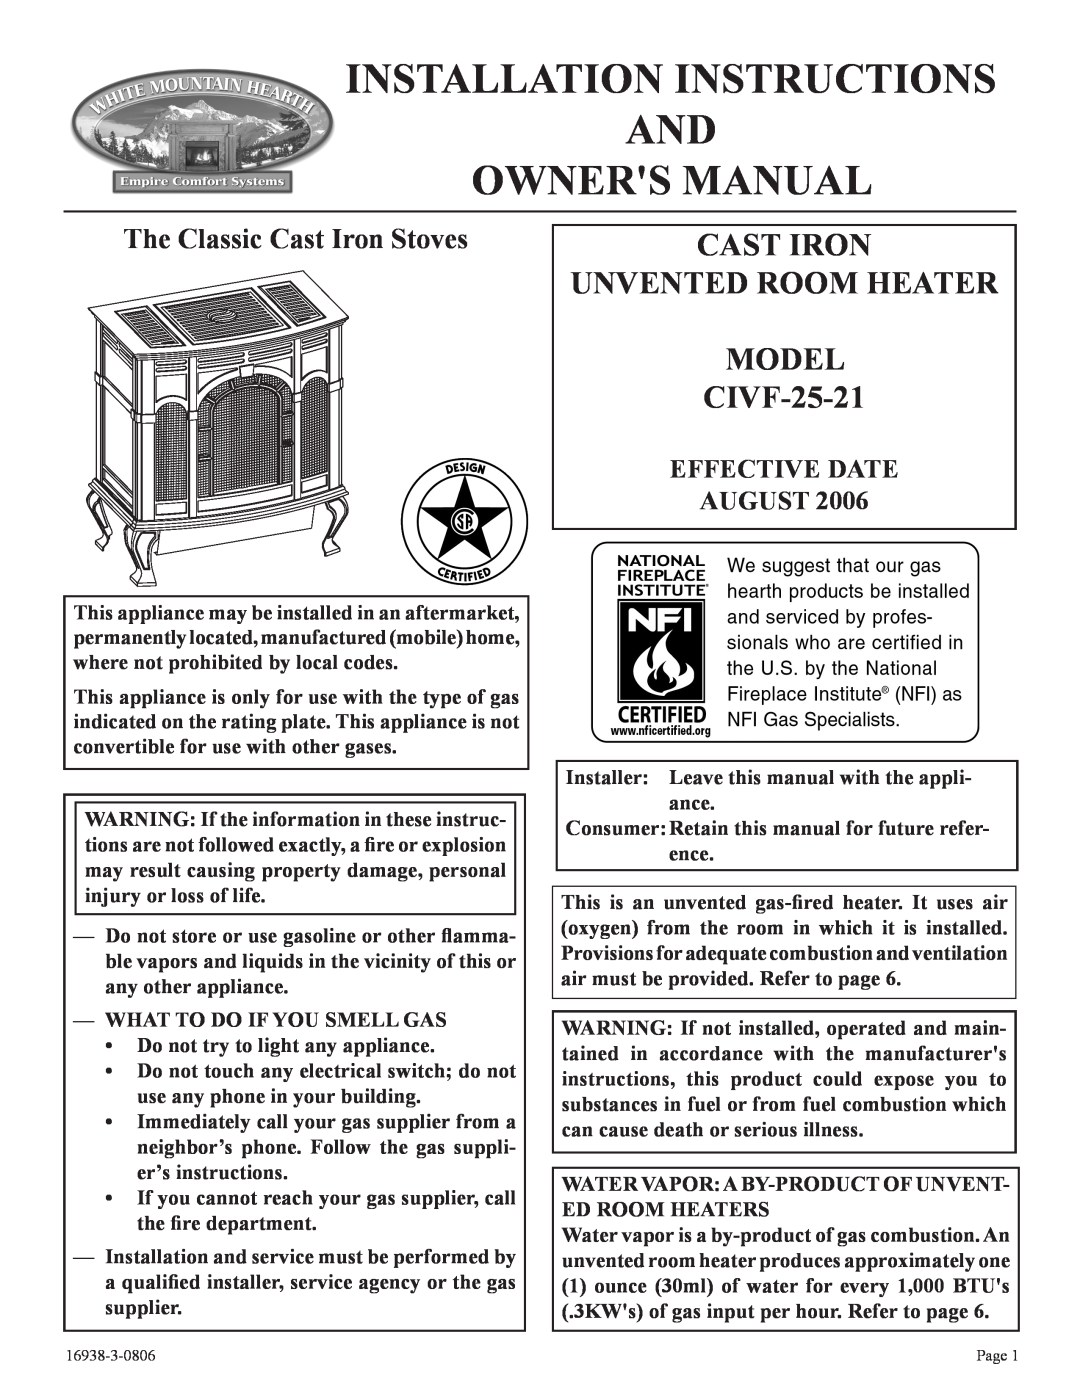 Empire Comfort Systems CIVF-25-21 installation instructions Effective Date August, The Classic Cast Iron Stoves 